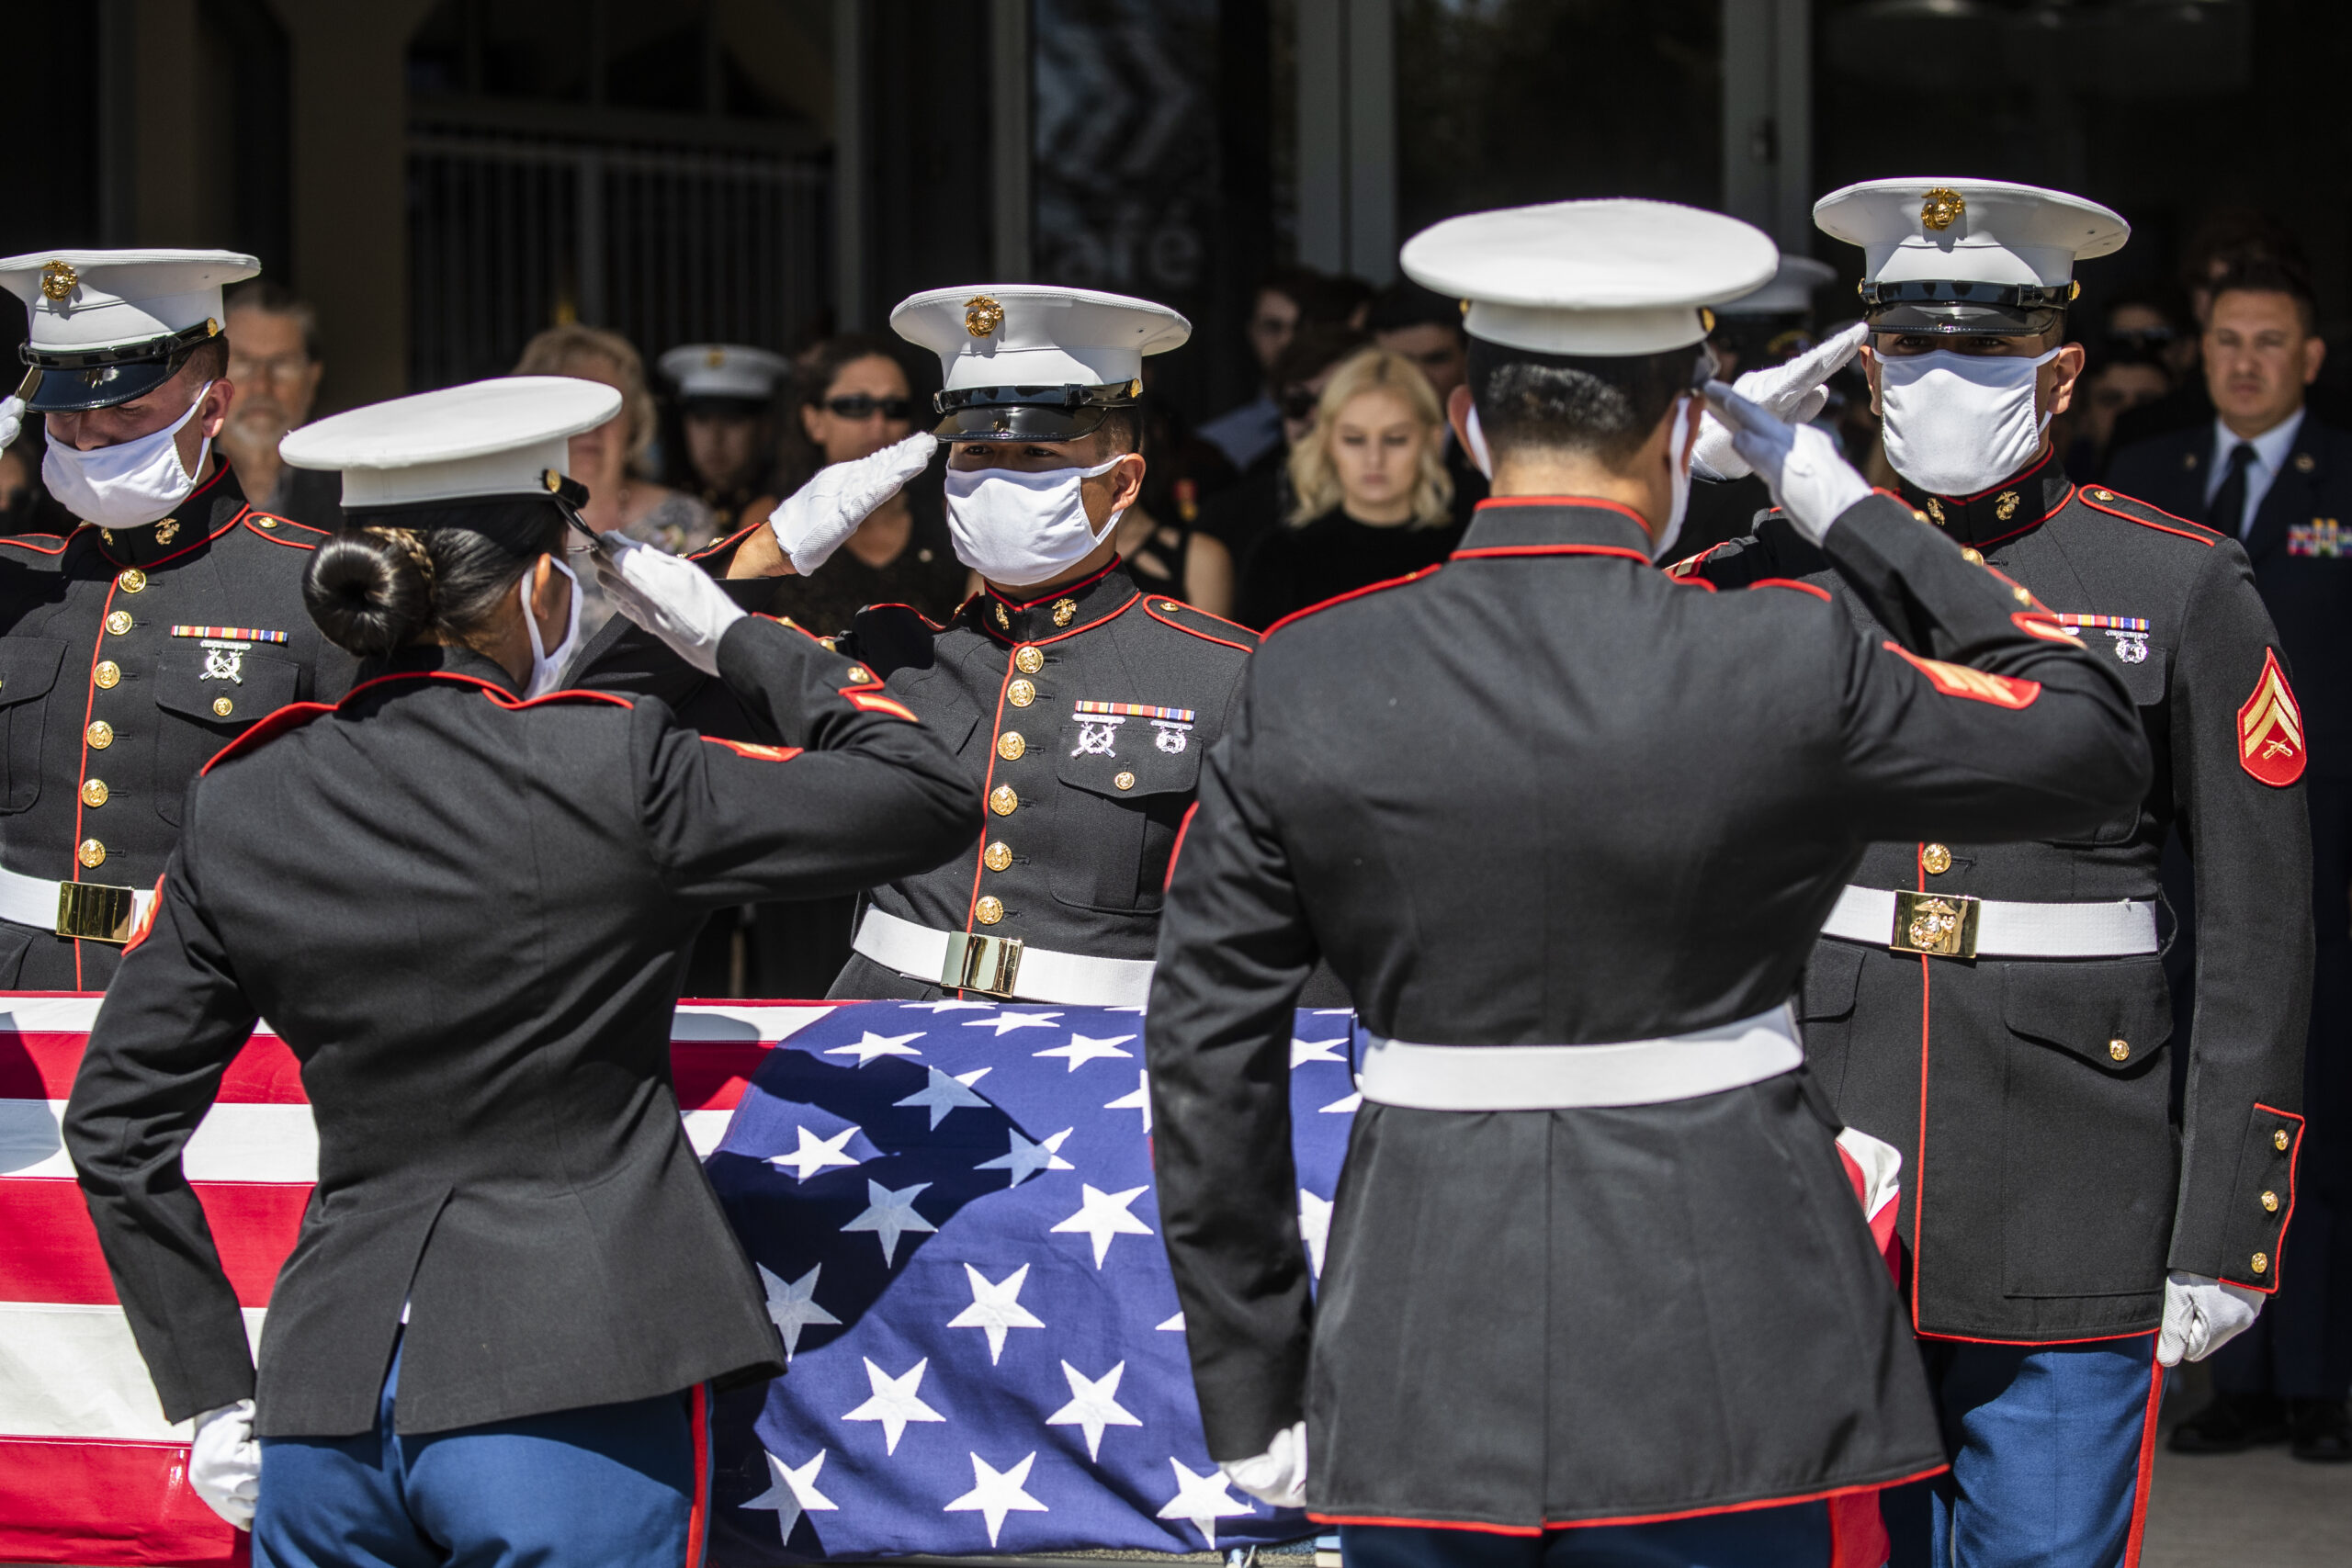 U.S. Marines pallbearers salute the casket of Sgt. Nicole L. Gee during a public memorial service at Bayside Church Adventure Campus in Roseville, Calif. Saturday, Sept. 18, 2021. Gee, 23, assigned to Combat Logistics Battalion, 24th Marine Expeditionary Unit, II Marine Expeditionary Force, Camp Lejeune, North Carolina, died in a bombing attack at Hamid Karzai International Airport in Kabul, Afghanistan on August 26, along with 12 other U.S. service members. (Stephen Lam/The San Francisco Chronicle via Getty Images)